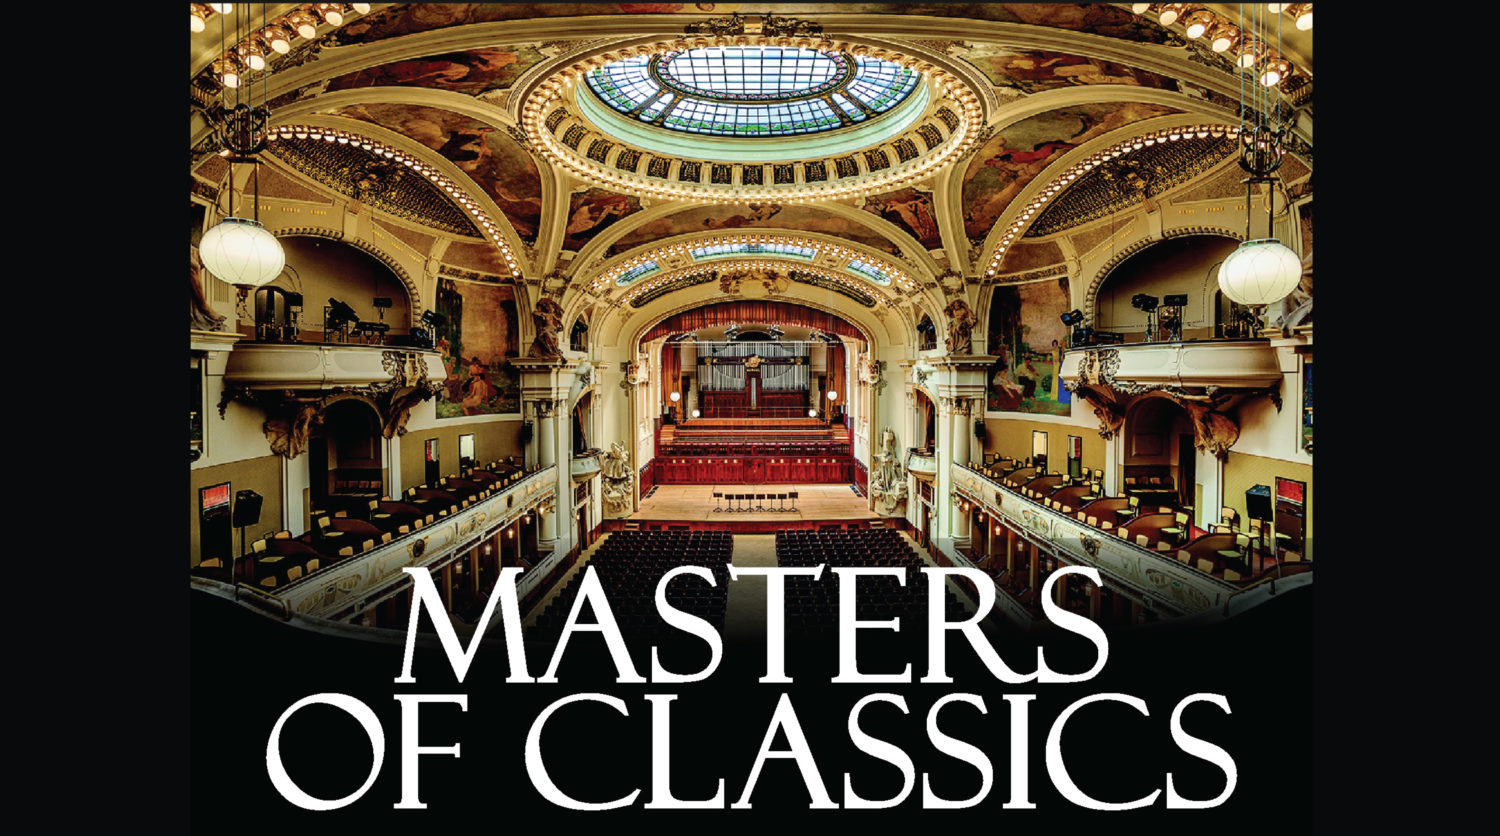 MASTERS OF CLASSICS IN THE MUNICIPAL HOUSE 02.04.2020 - přesun na 16.07.2020